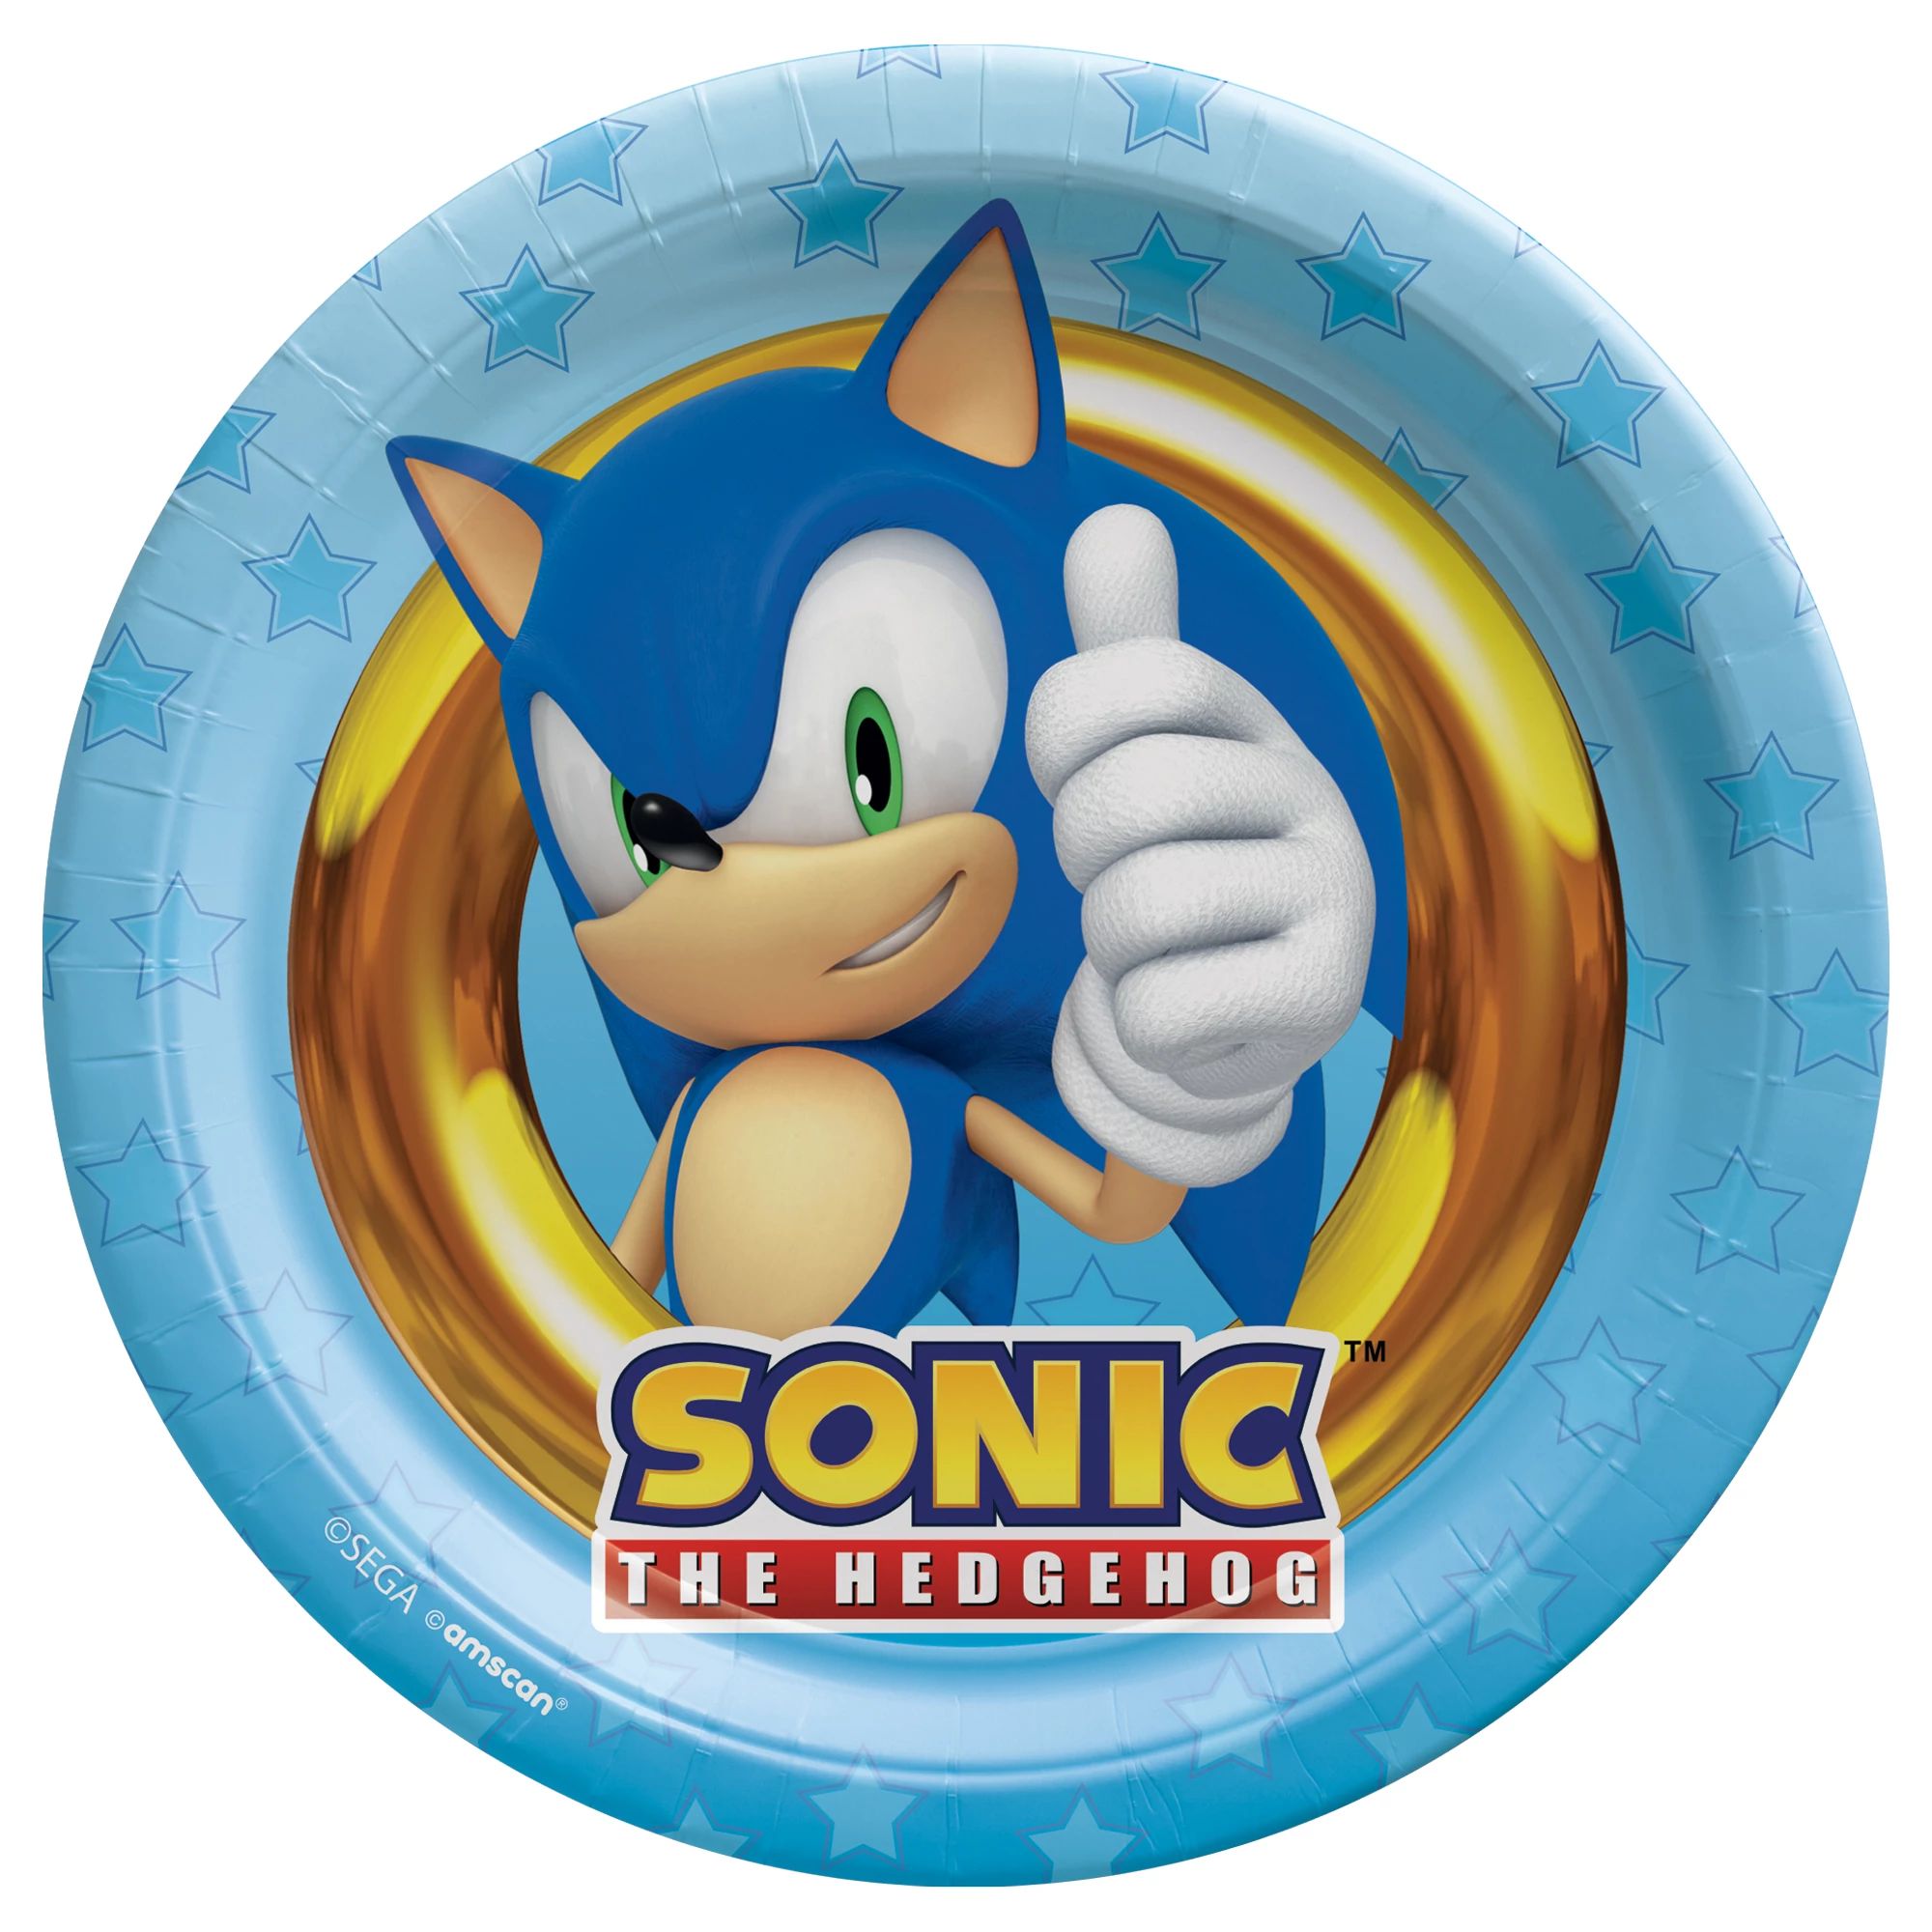 Sonic 7in Round Plates